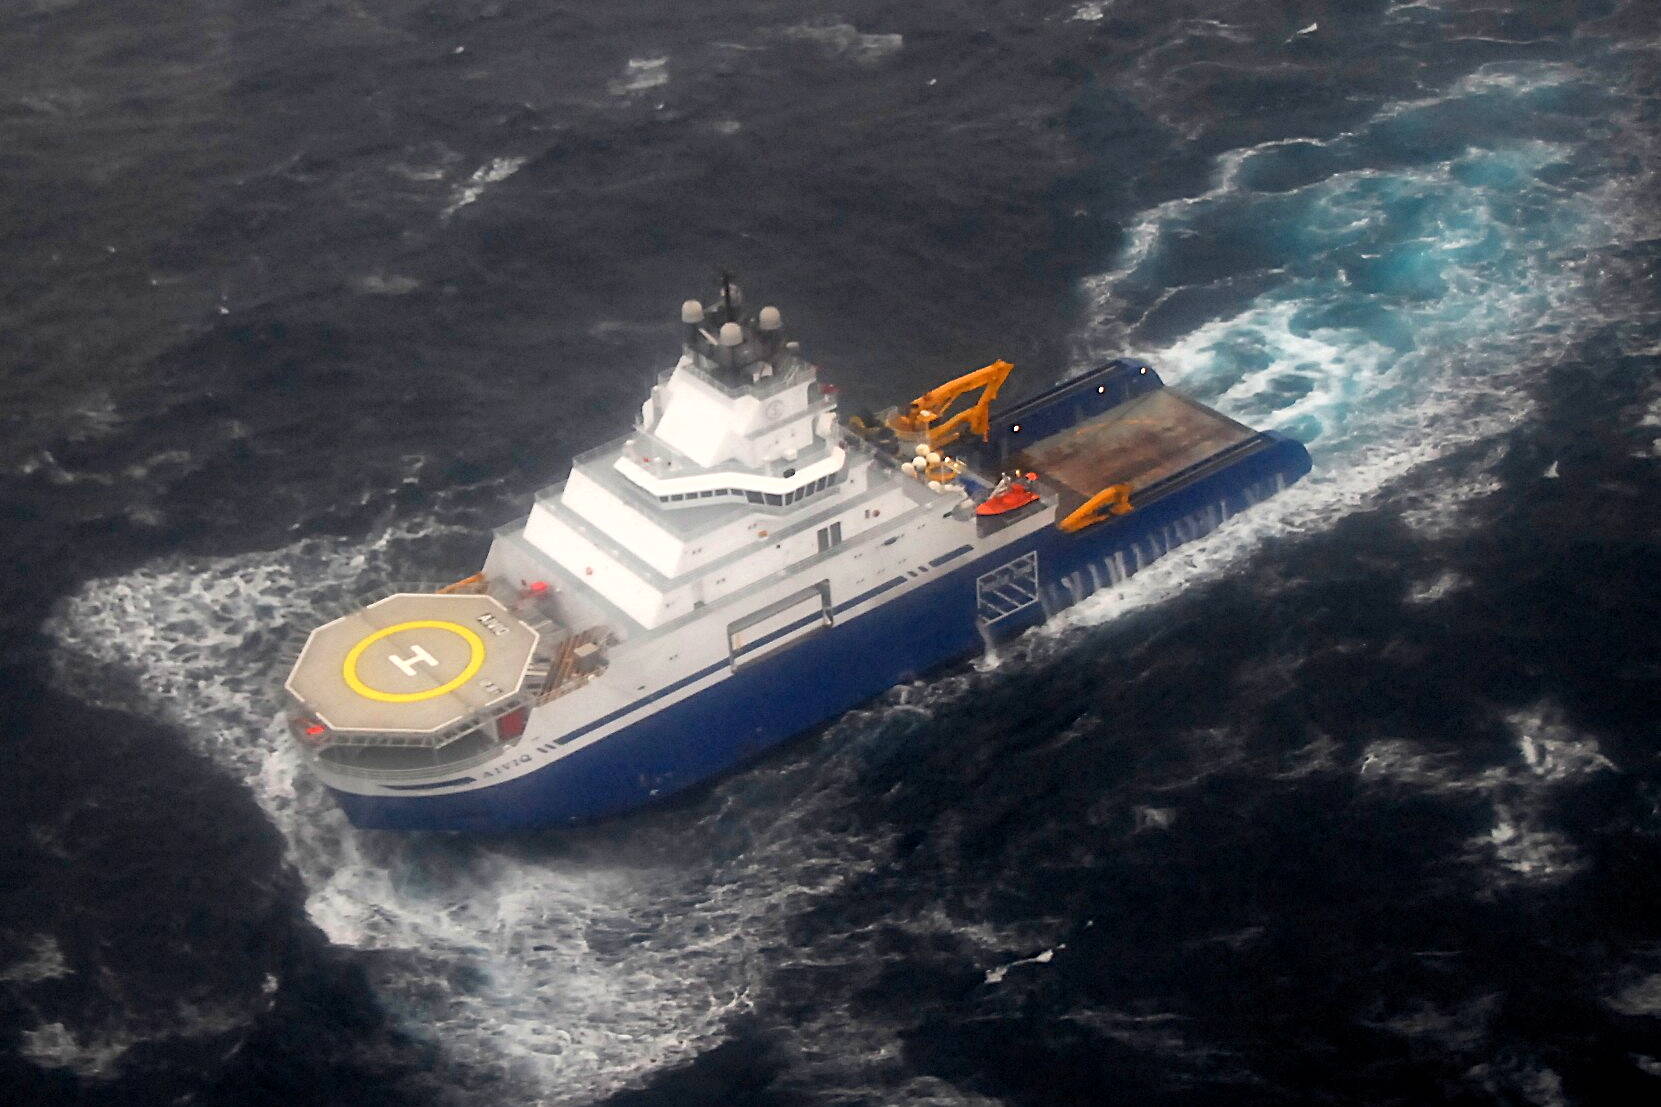 Funding to purchase the Aiviq icebreaker, seen here towing a mobile drilling rig about 100 miles southwest of Kodiak, was cut from $1.7 trillion omnibus spending package passed by Congress. According both of Alaska’s Republican senators, it is a disappointing cut. (Courtesy / U.S. Coast Guard)